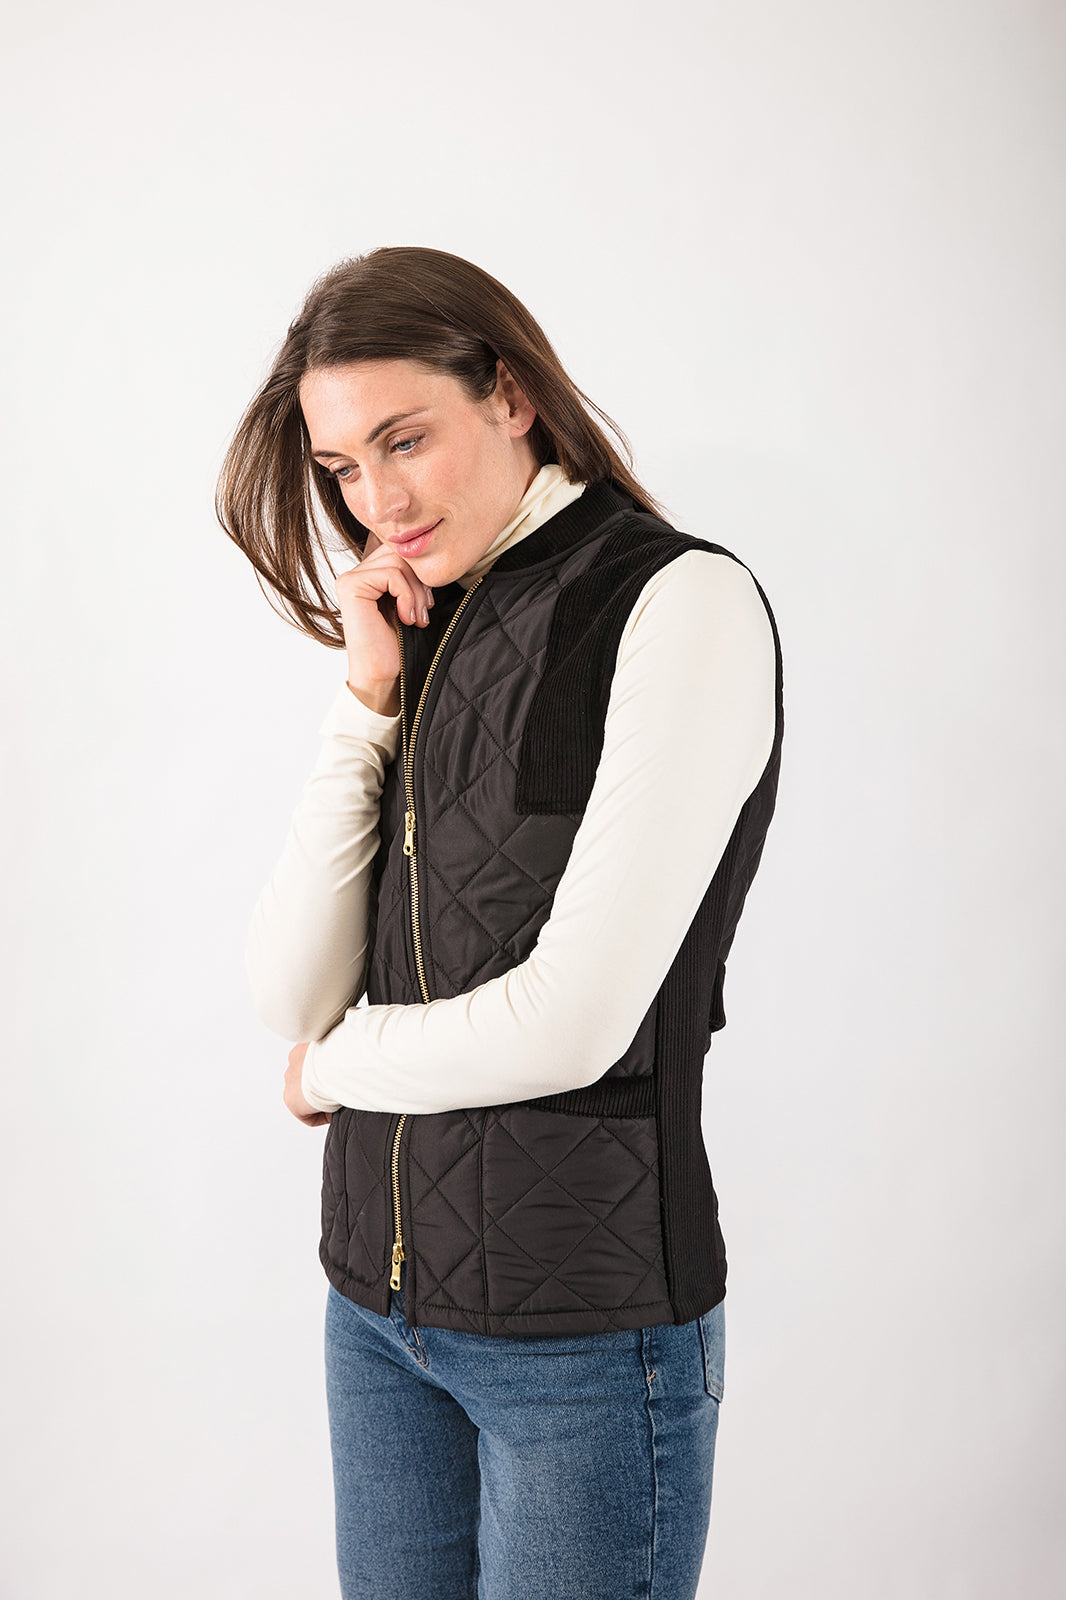 Quilted Gilet in Black